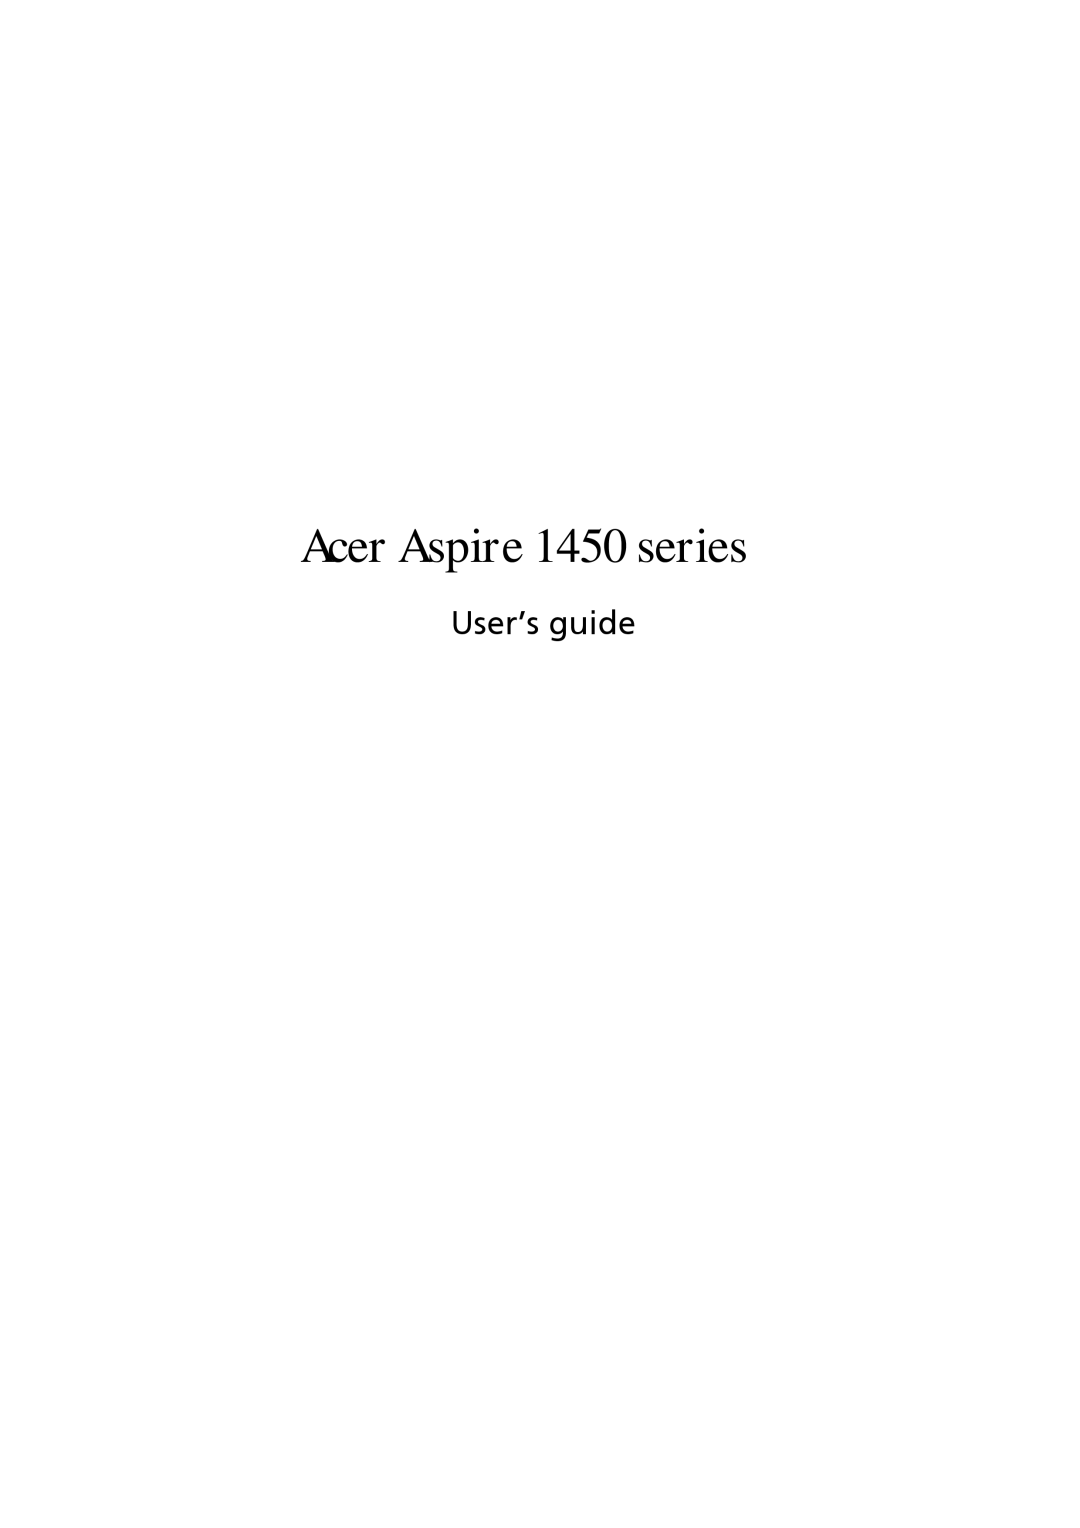 Acer manual Acer Aspire 1450 series, User’s guide 